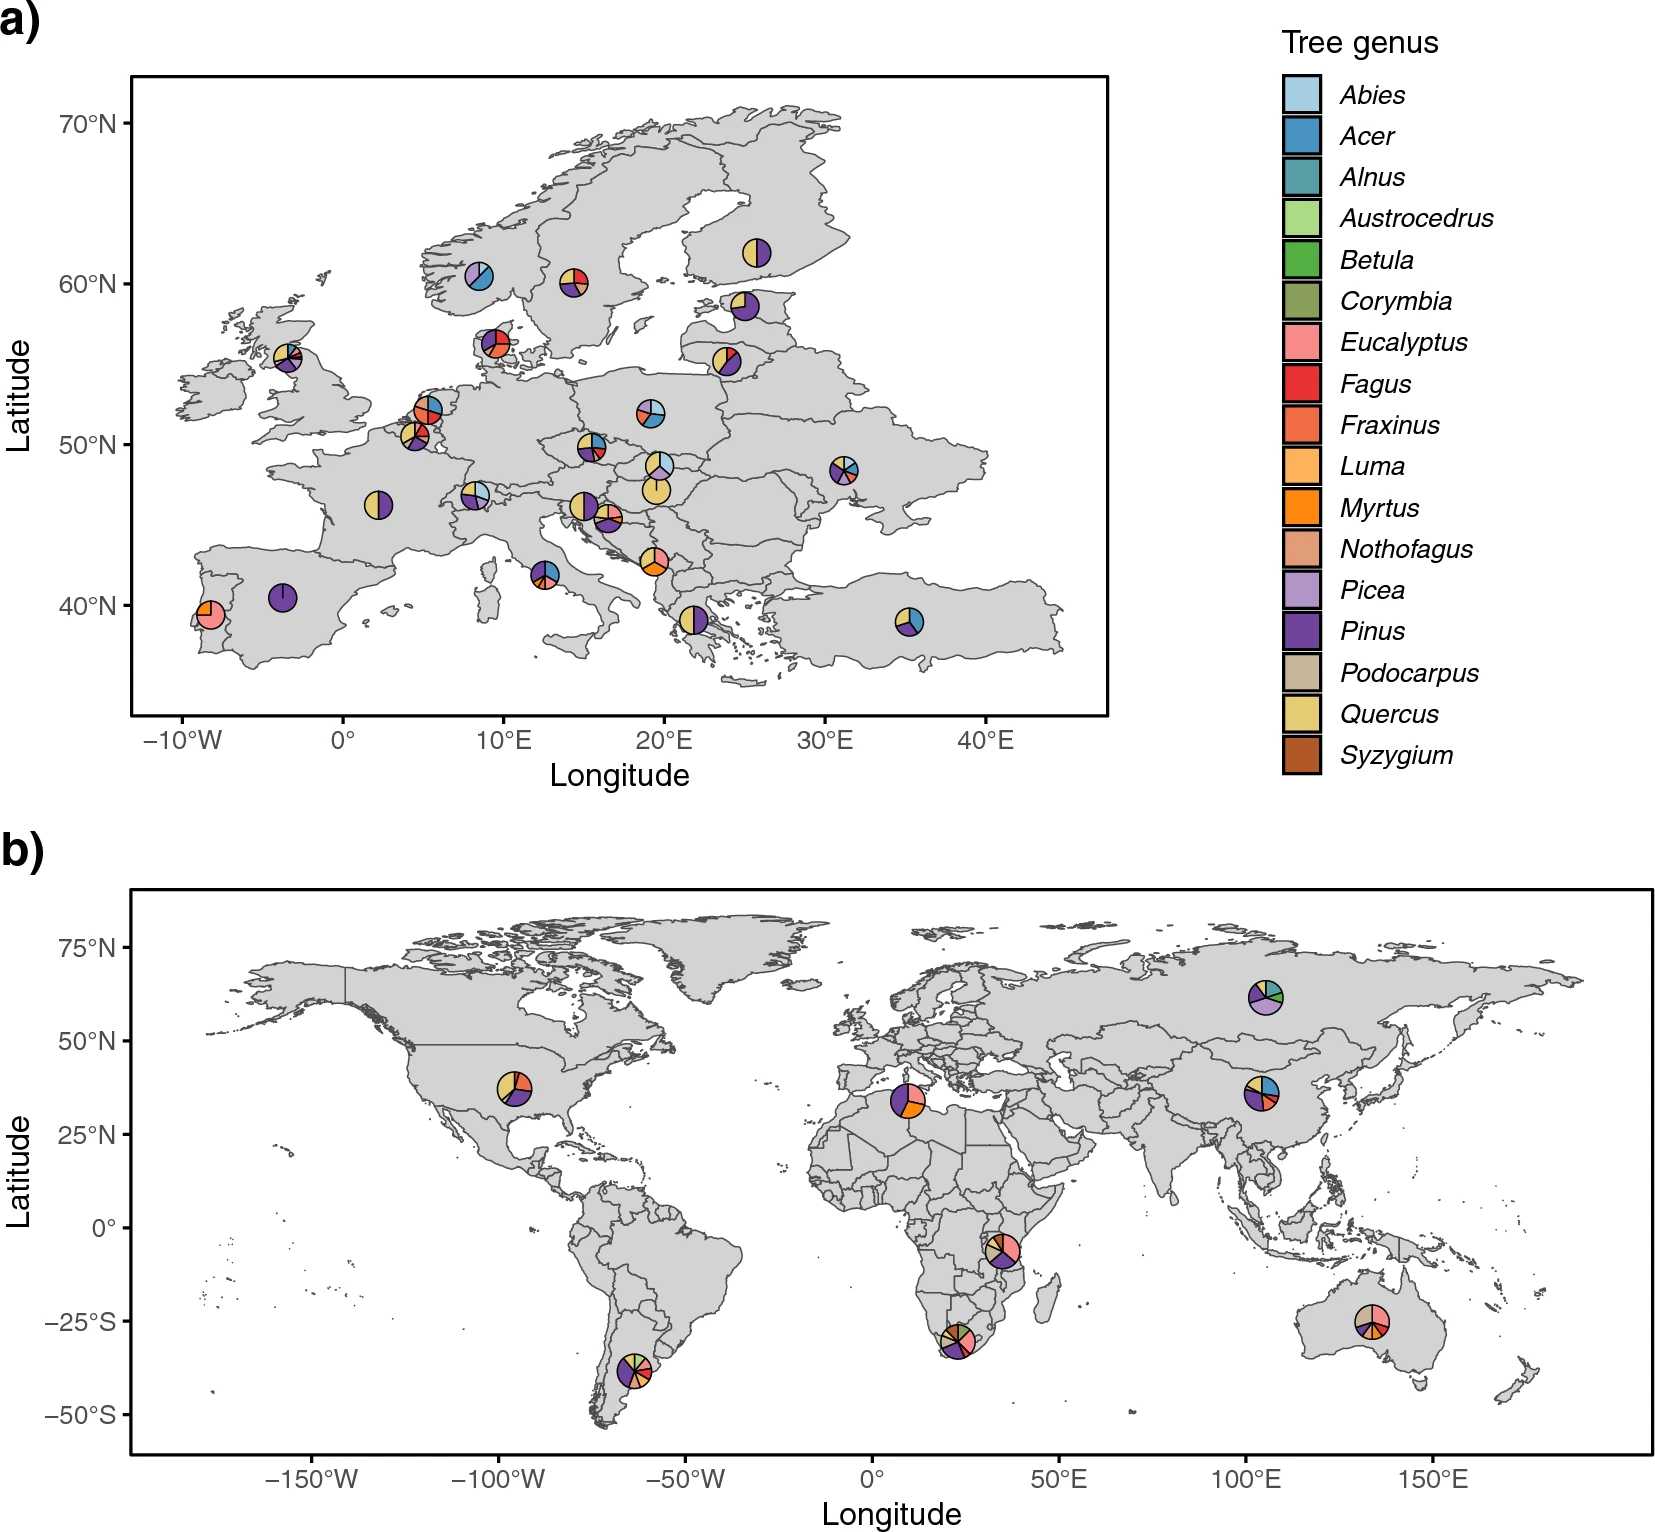 Climate, host and geography shape insect and fungal communities of trees